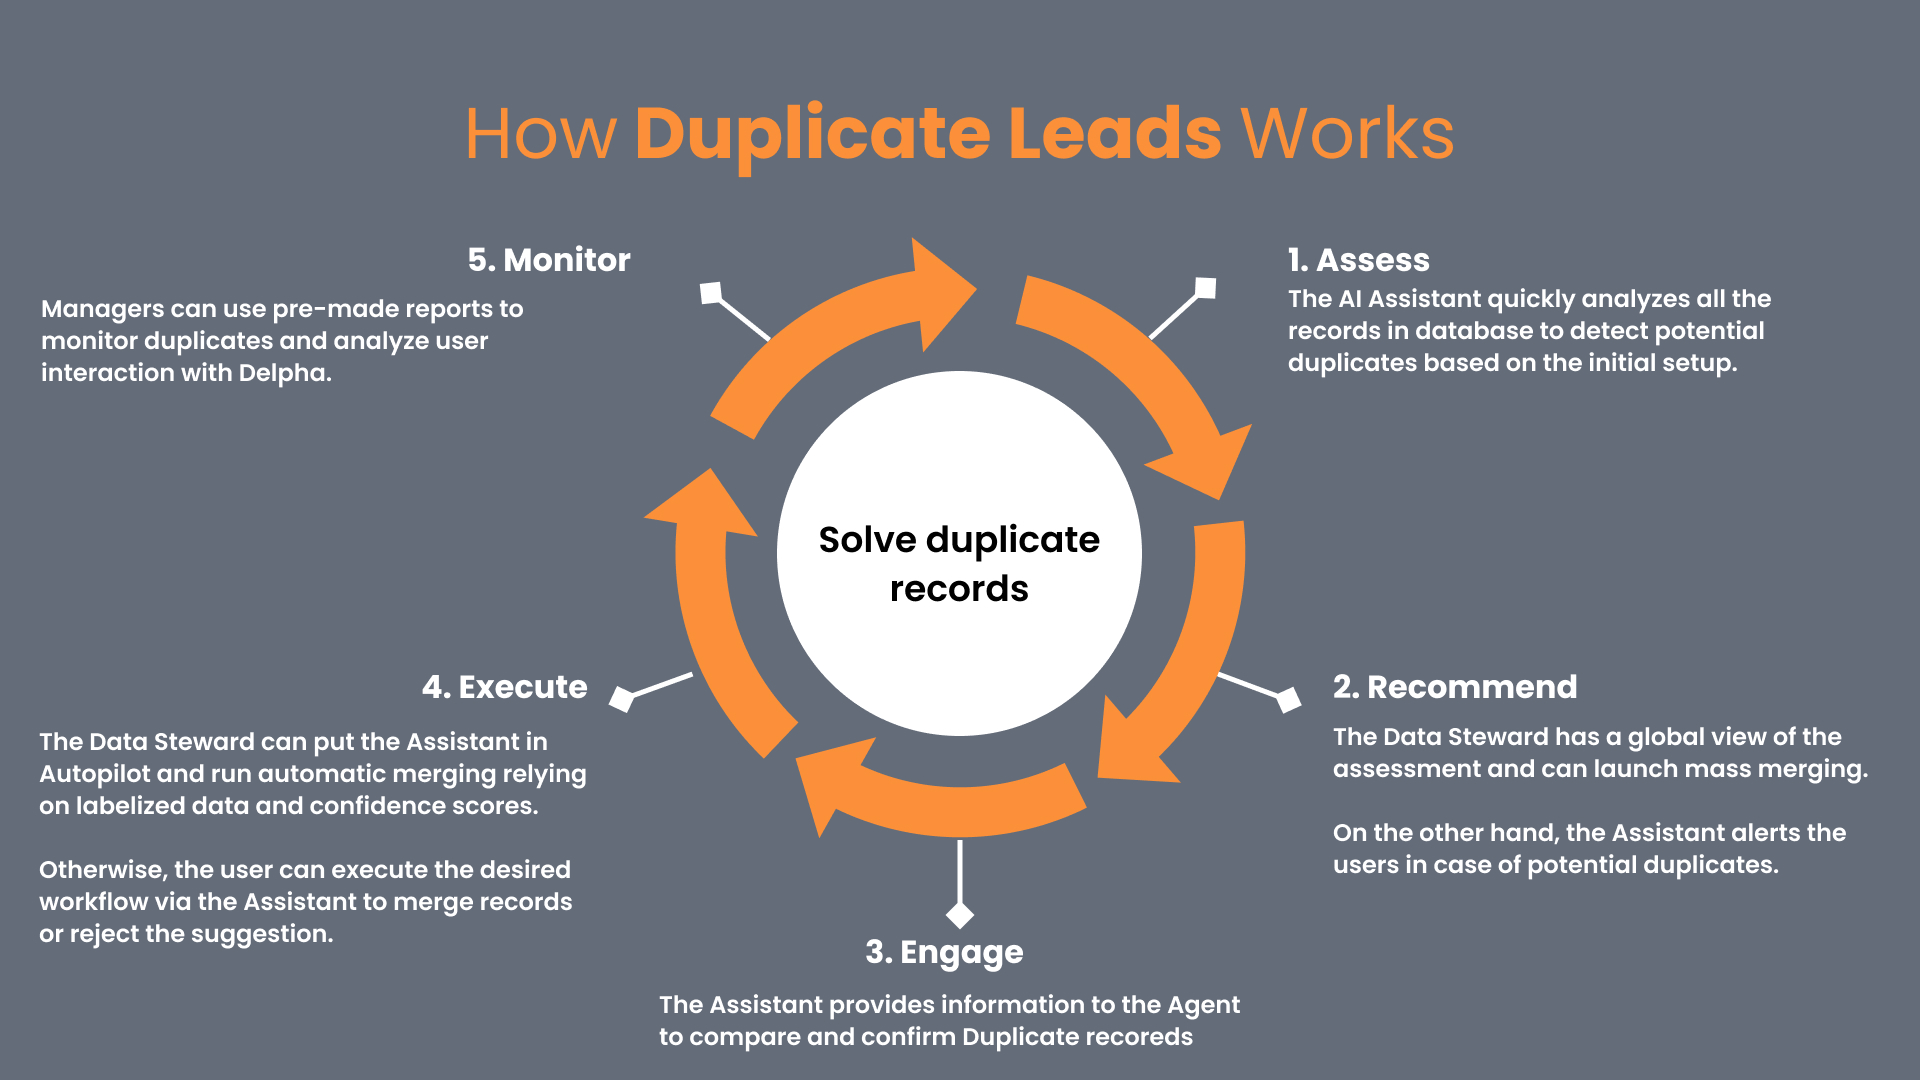 The Duplicate Leads feature works by using AI for fast and accurate detection, synthesizes actionable insights, recommends merge or rejection solutions, collects feedback from user decision (feedback loop) and works in real-time for minimal disruption.